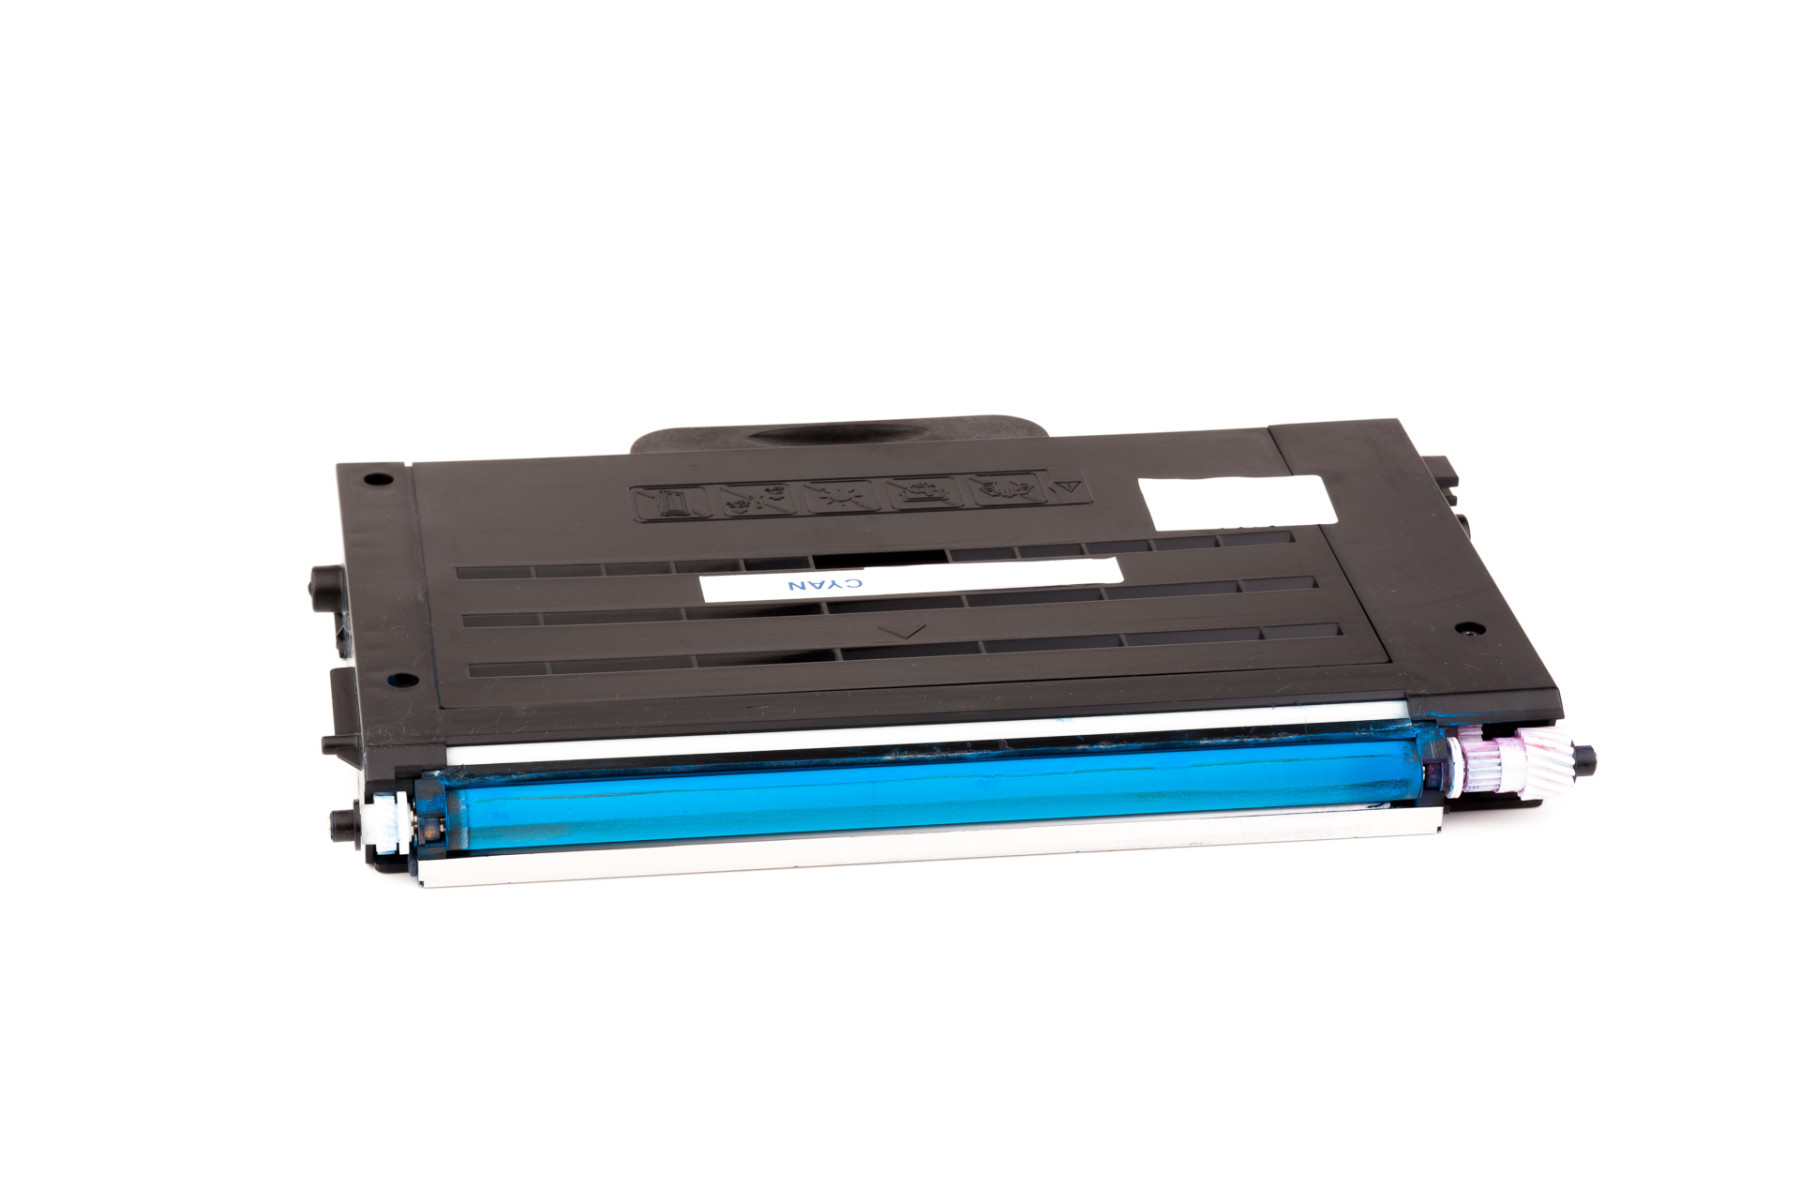 Set consisting of Toner cartridge (alternative) compatible with Samsung CLP-510/N with Chip black, cyan, magenta, yellow - Save 6%